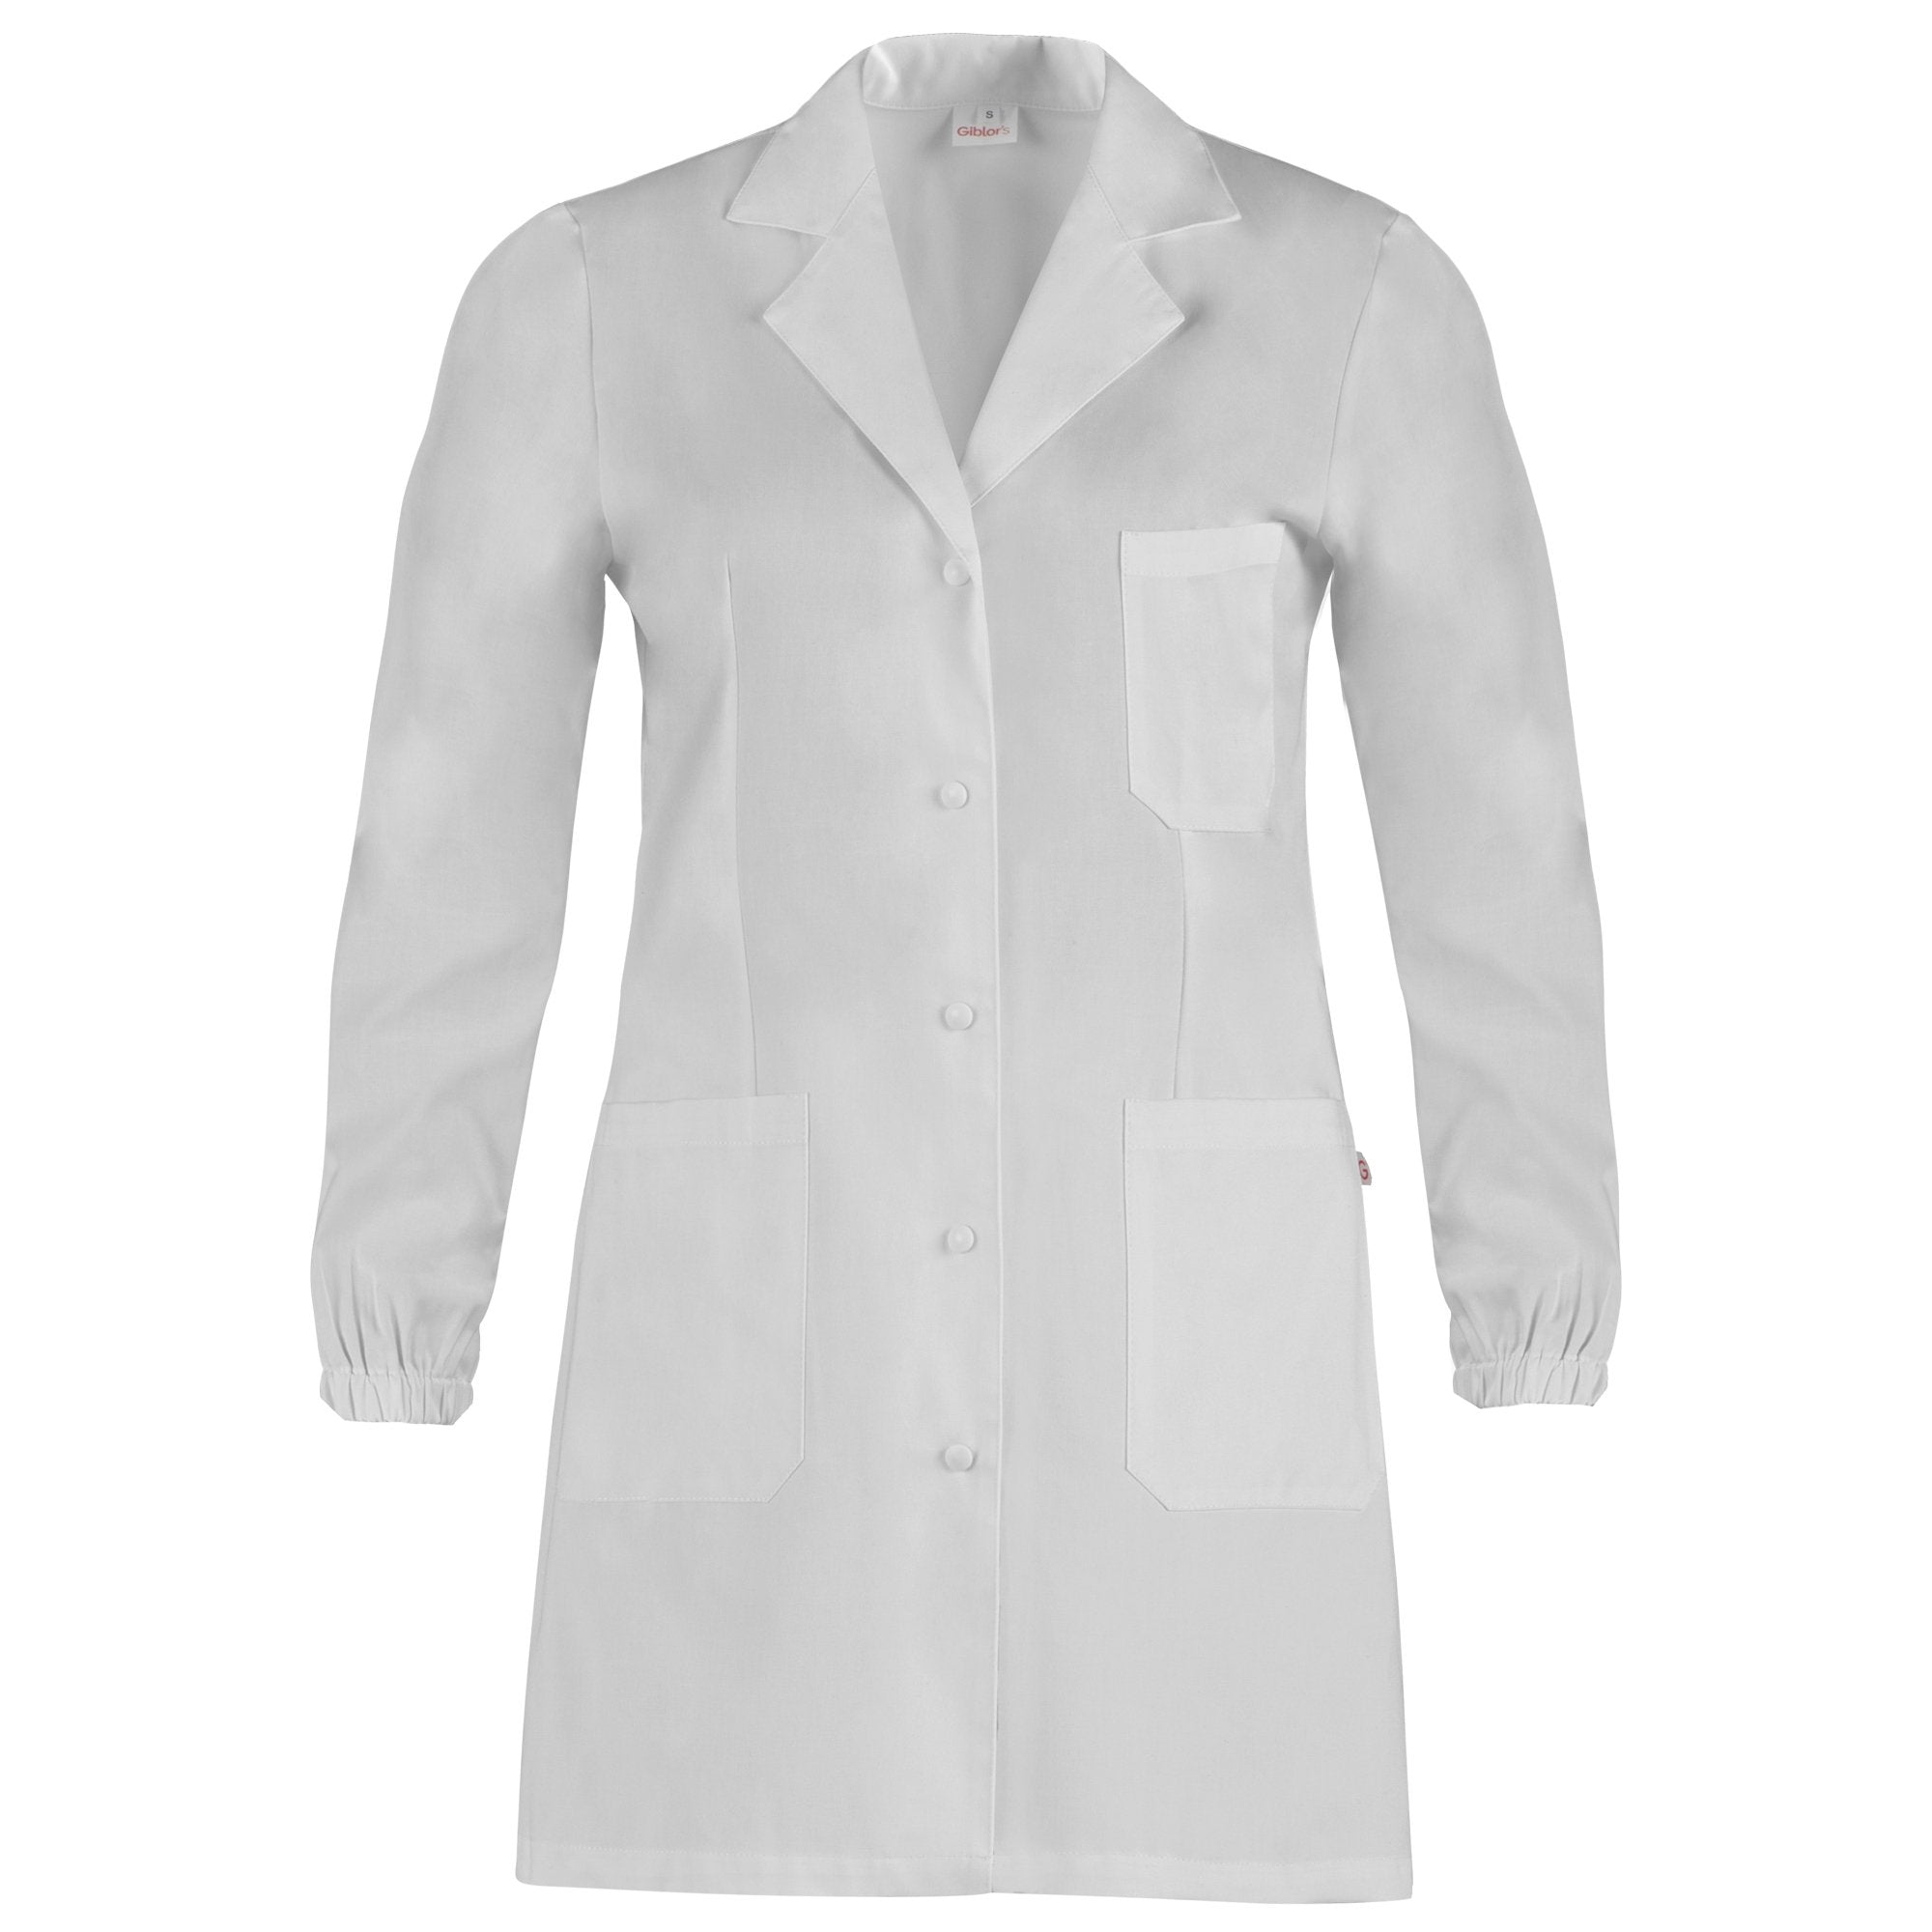 giblor's-camice-ospedaliero-milly-donna-tg-m-bianco